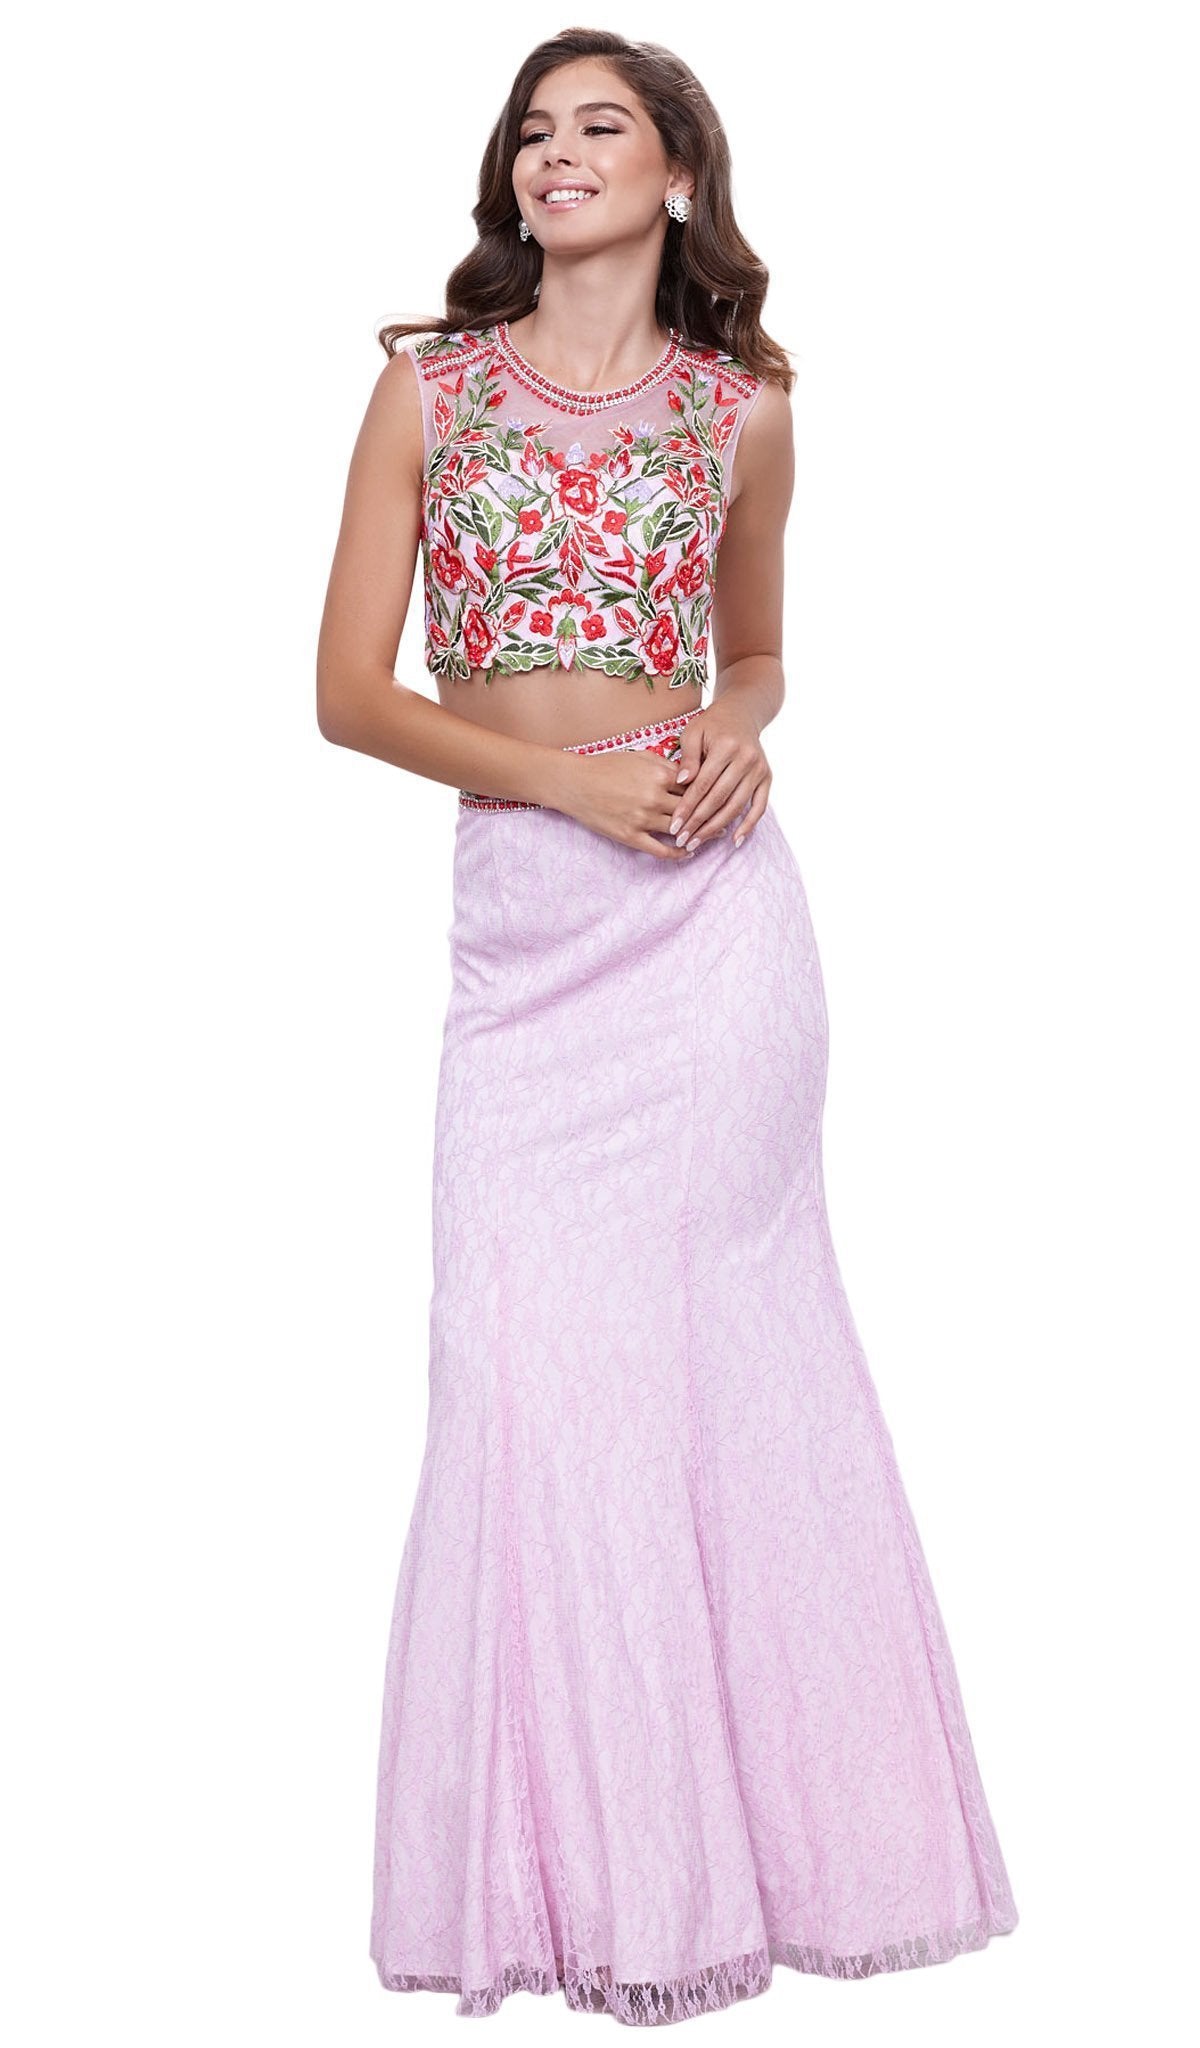 Image of Nox Anabel - 8373 Embellished High Neck Two-Piece Mermaid Dress